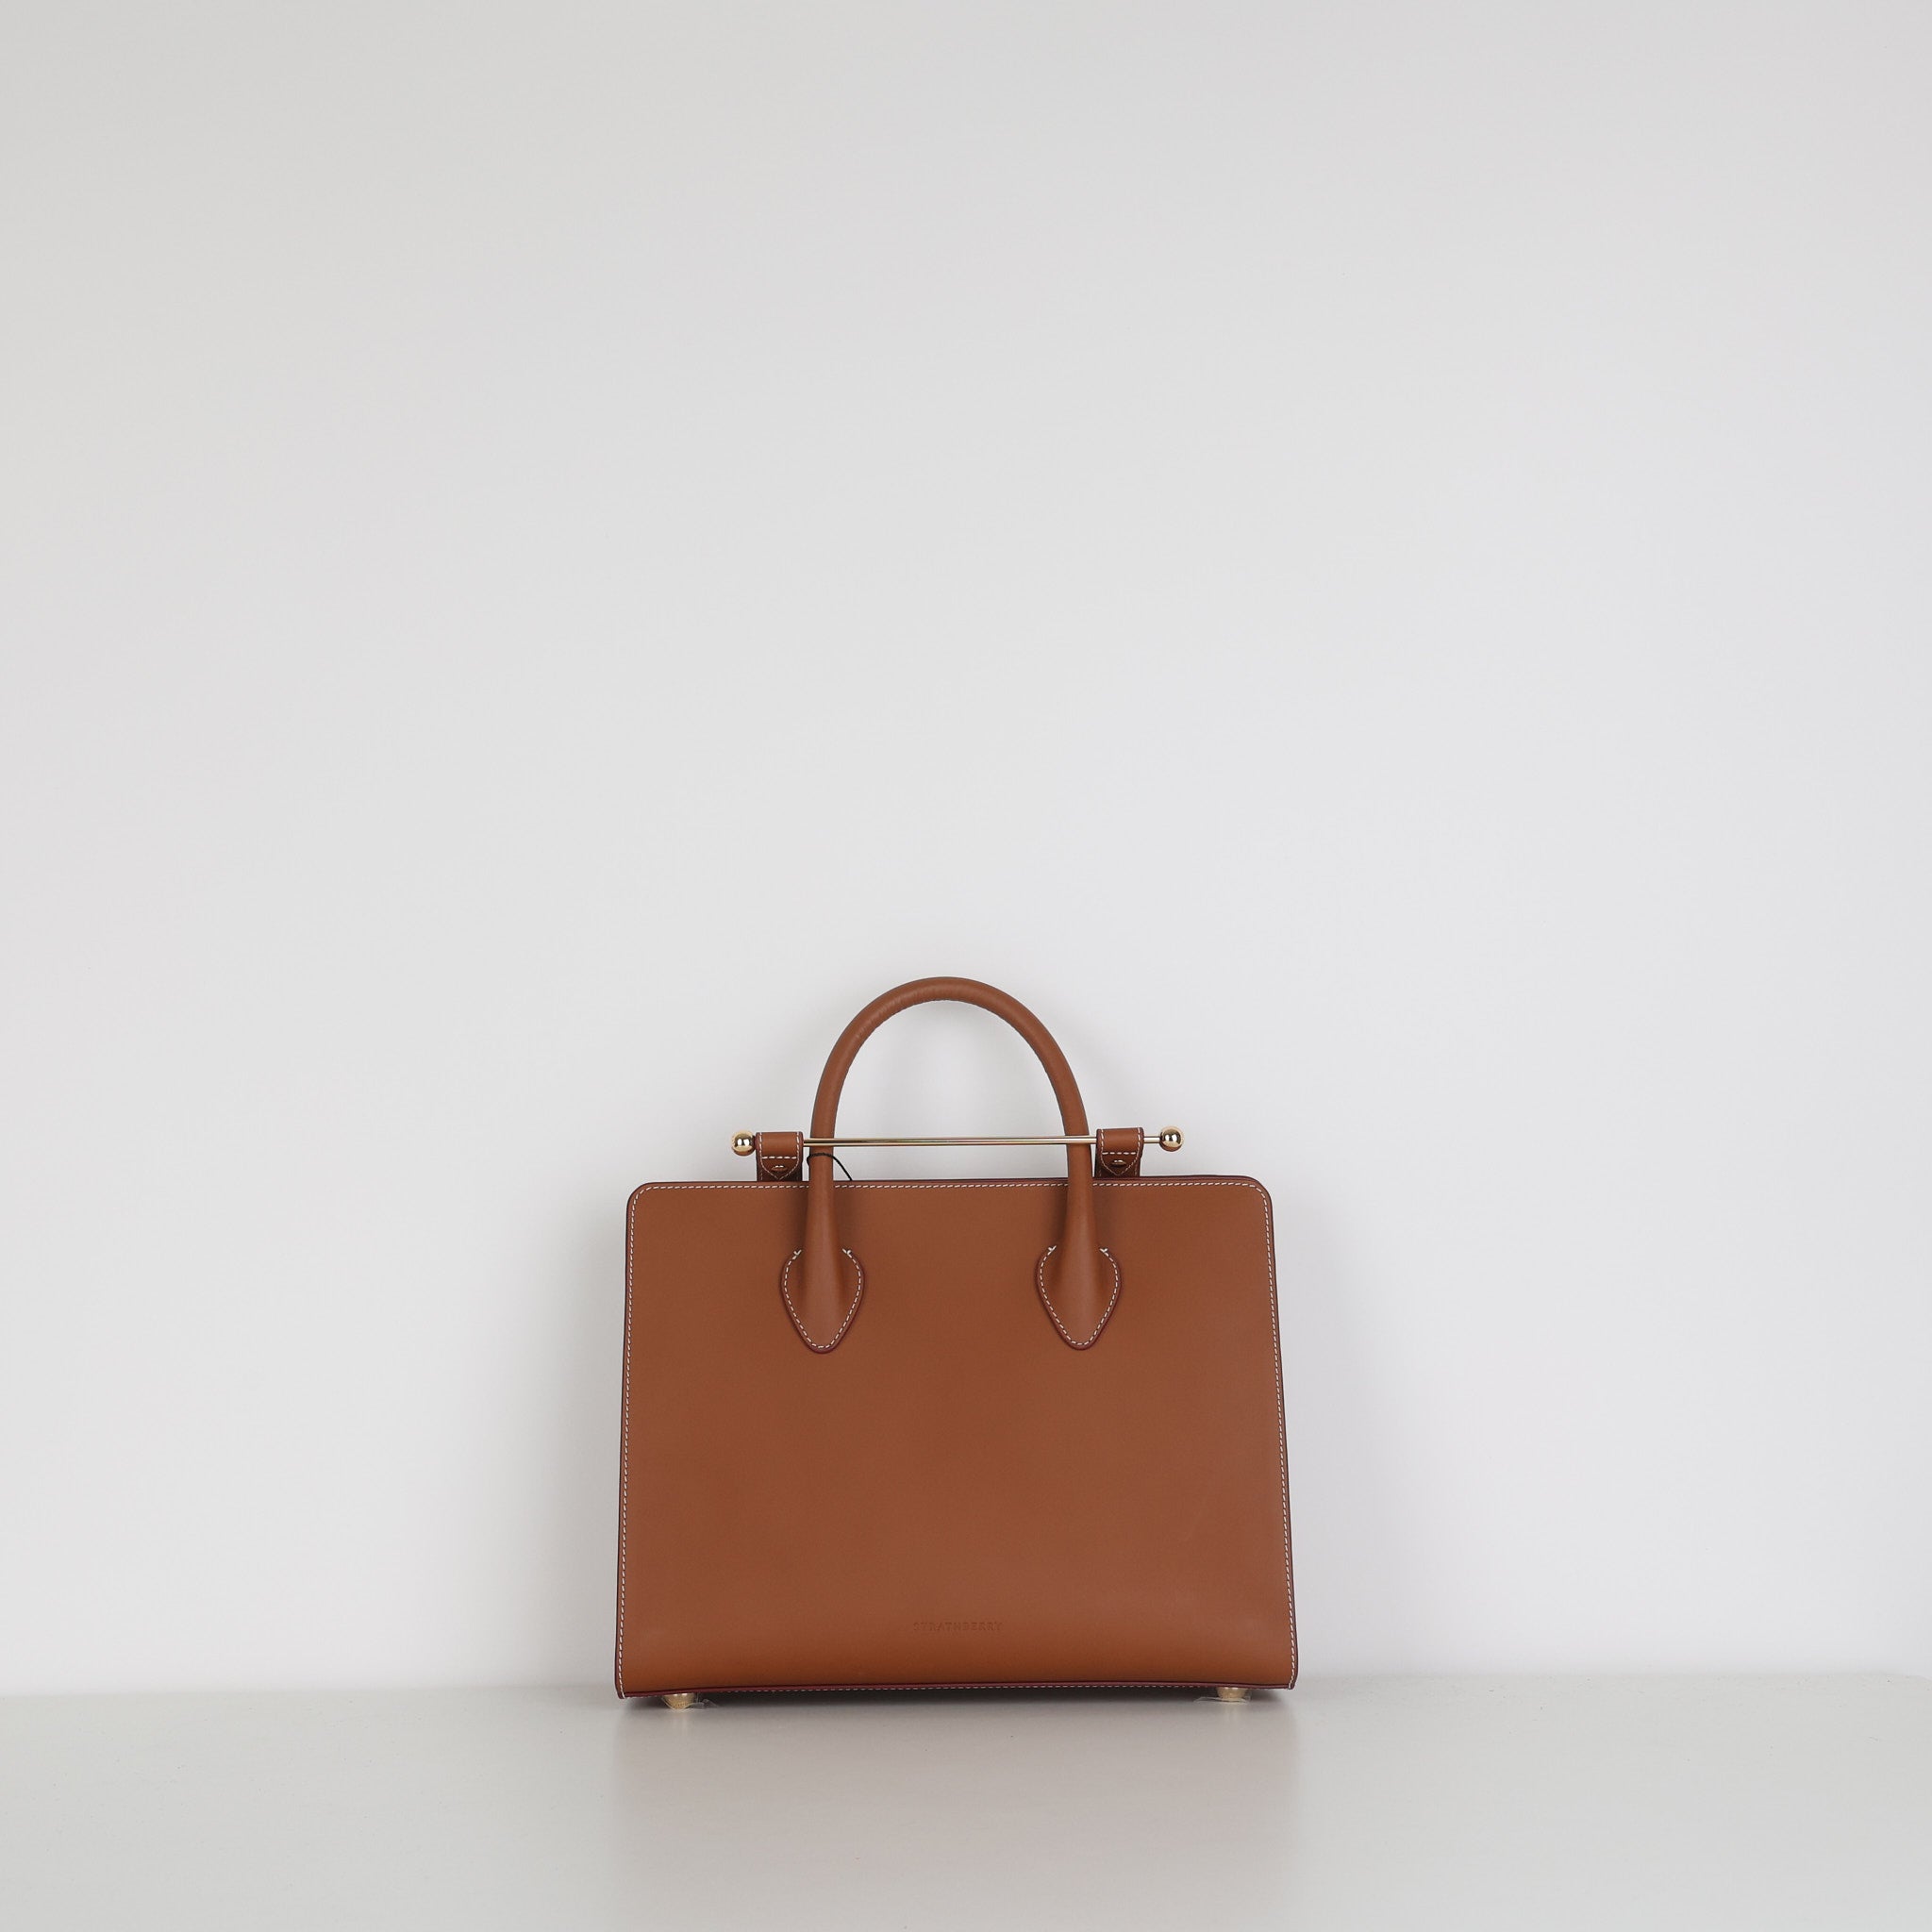 Strathberry - The Strathberry Midi Tote in Bridle Leather